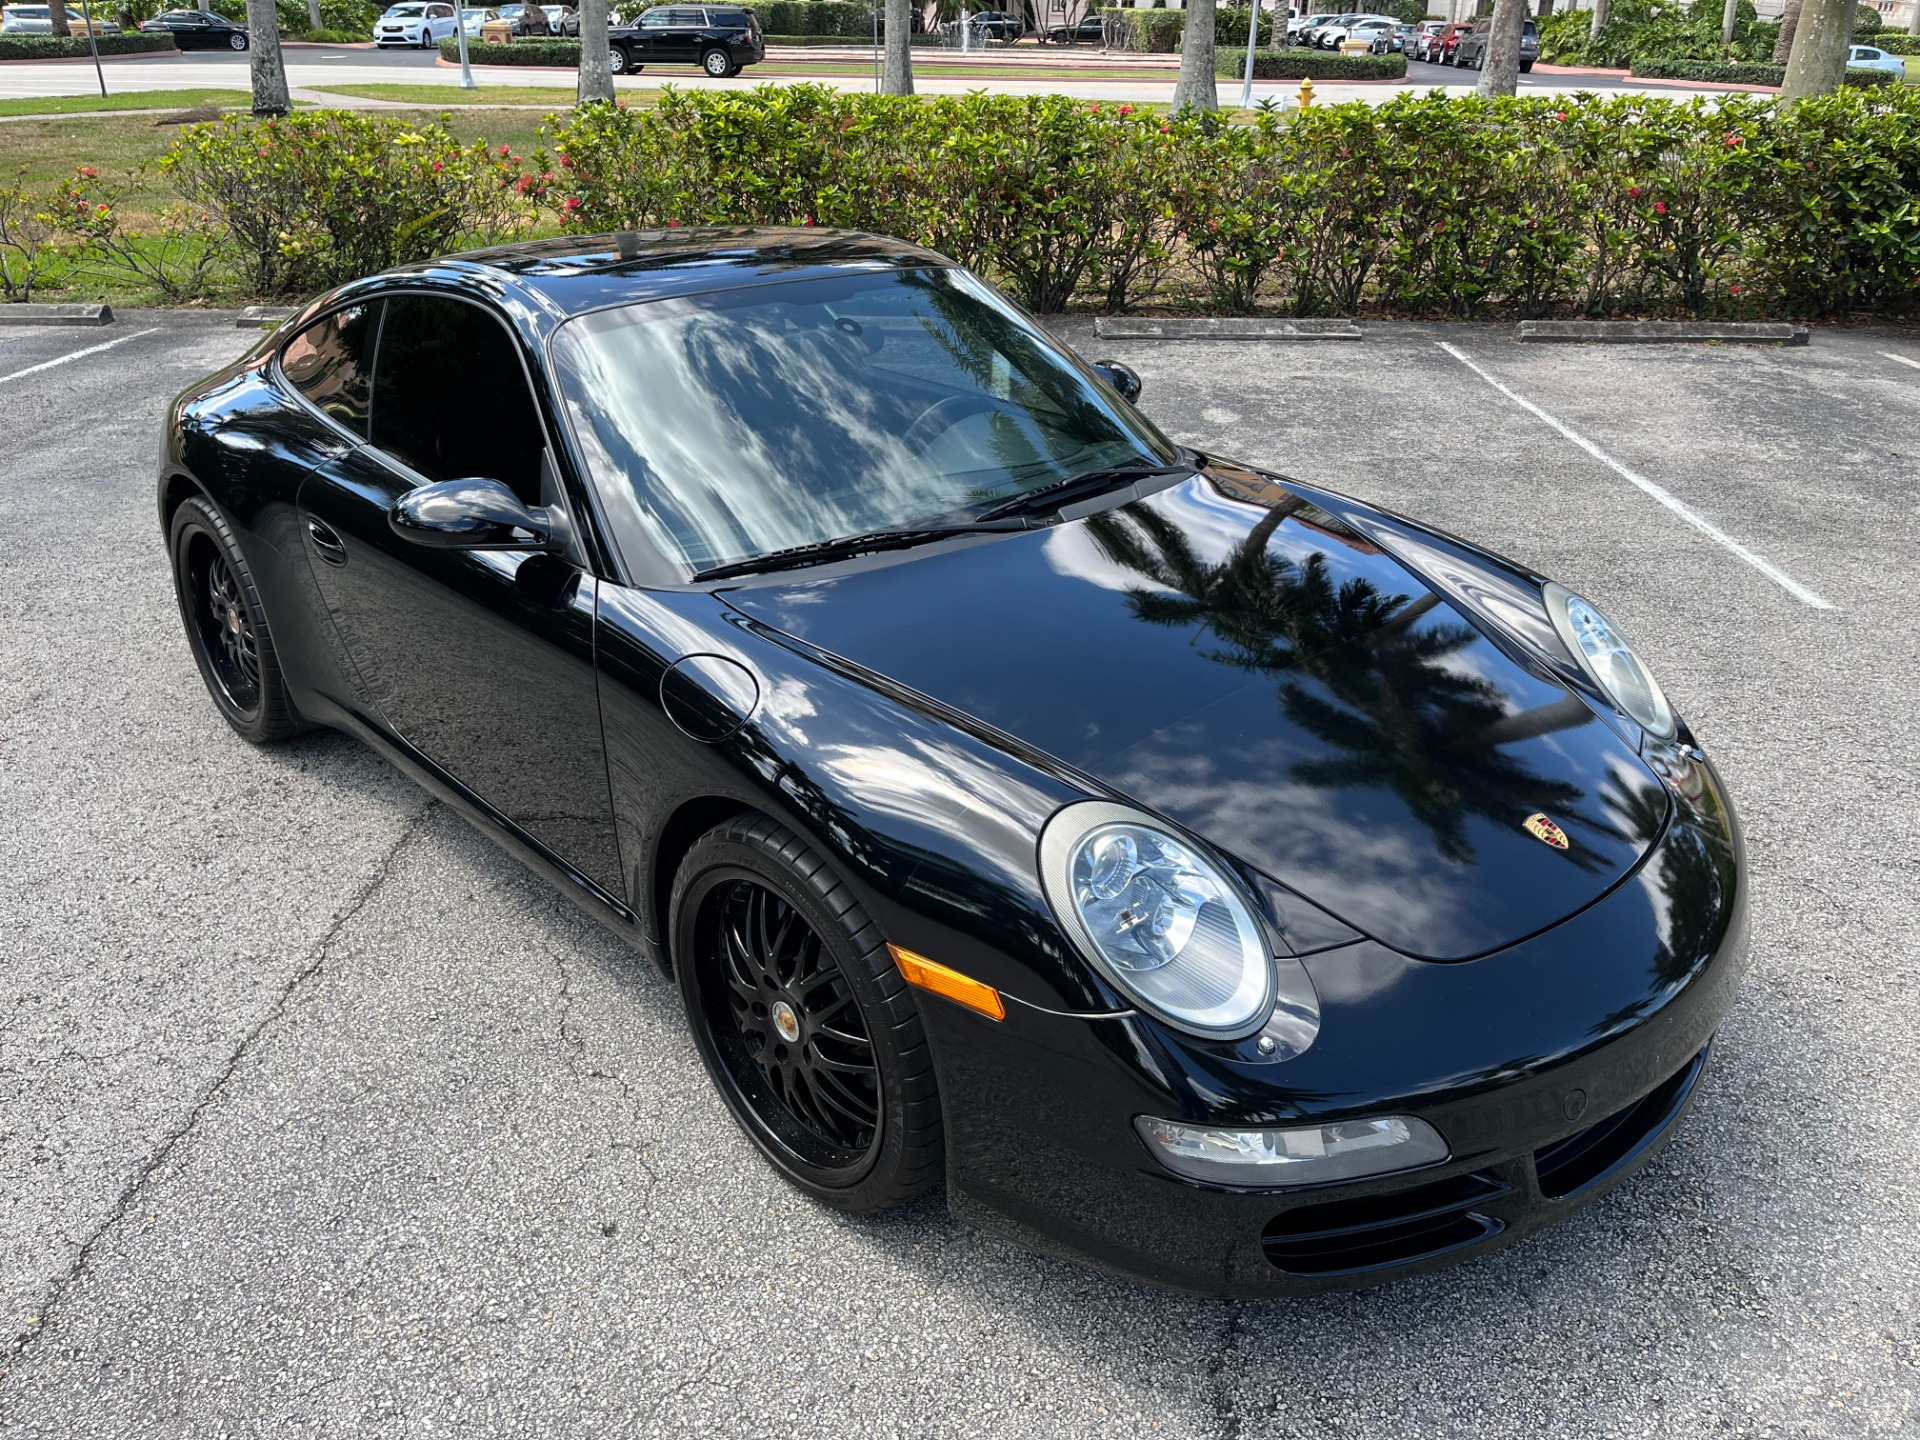 Used 2008 Porsche 911 Carrera for sale Sold at The Gables Sports Cars in Miami FL 33146 4